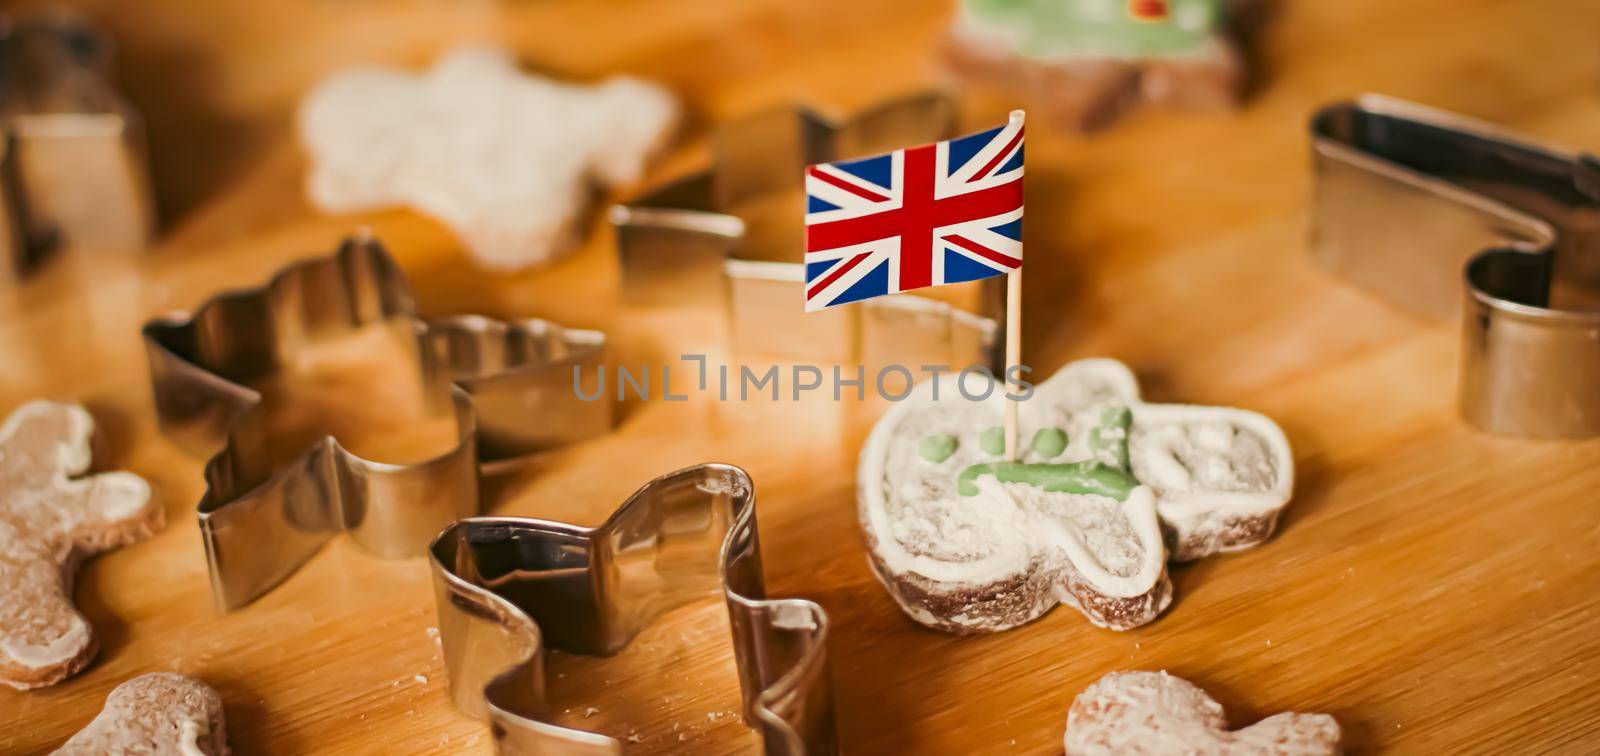 British holiday and Christmas baking concept. Union Jack flag of Great Britain and gingerbread men biscuits in the kitchen in England by Anneleven